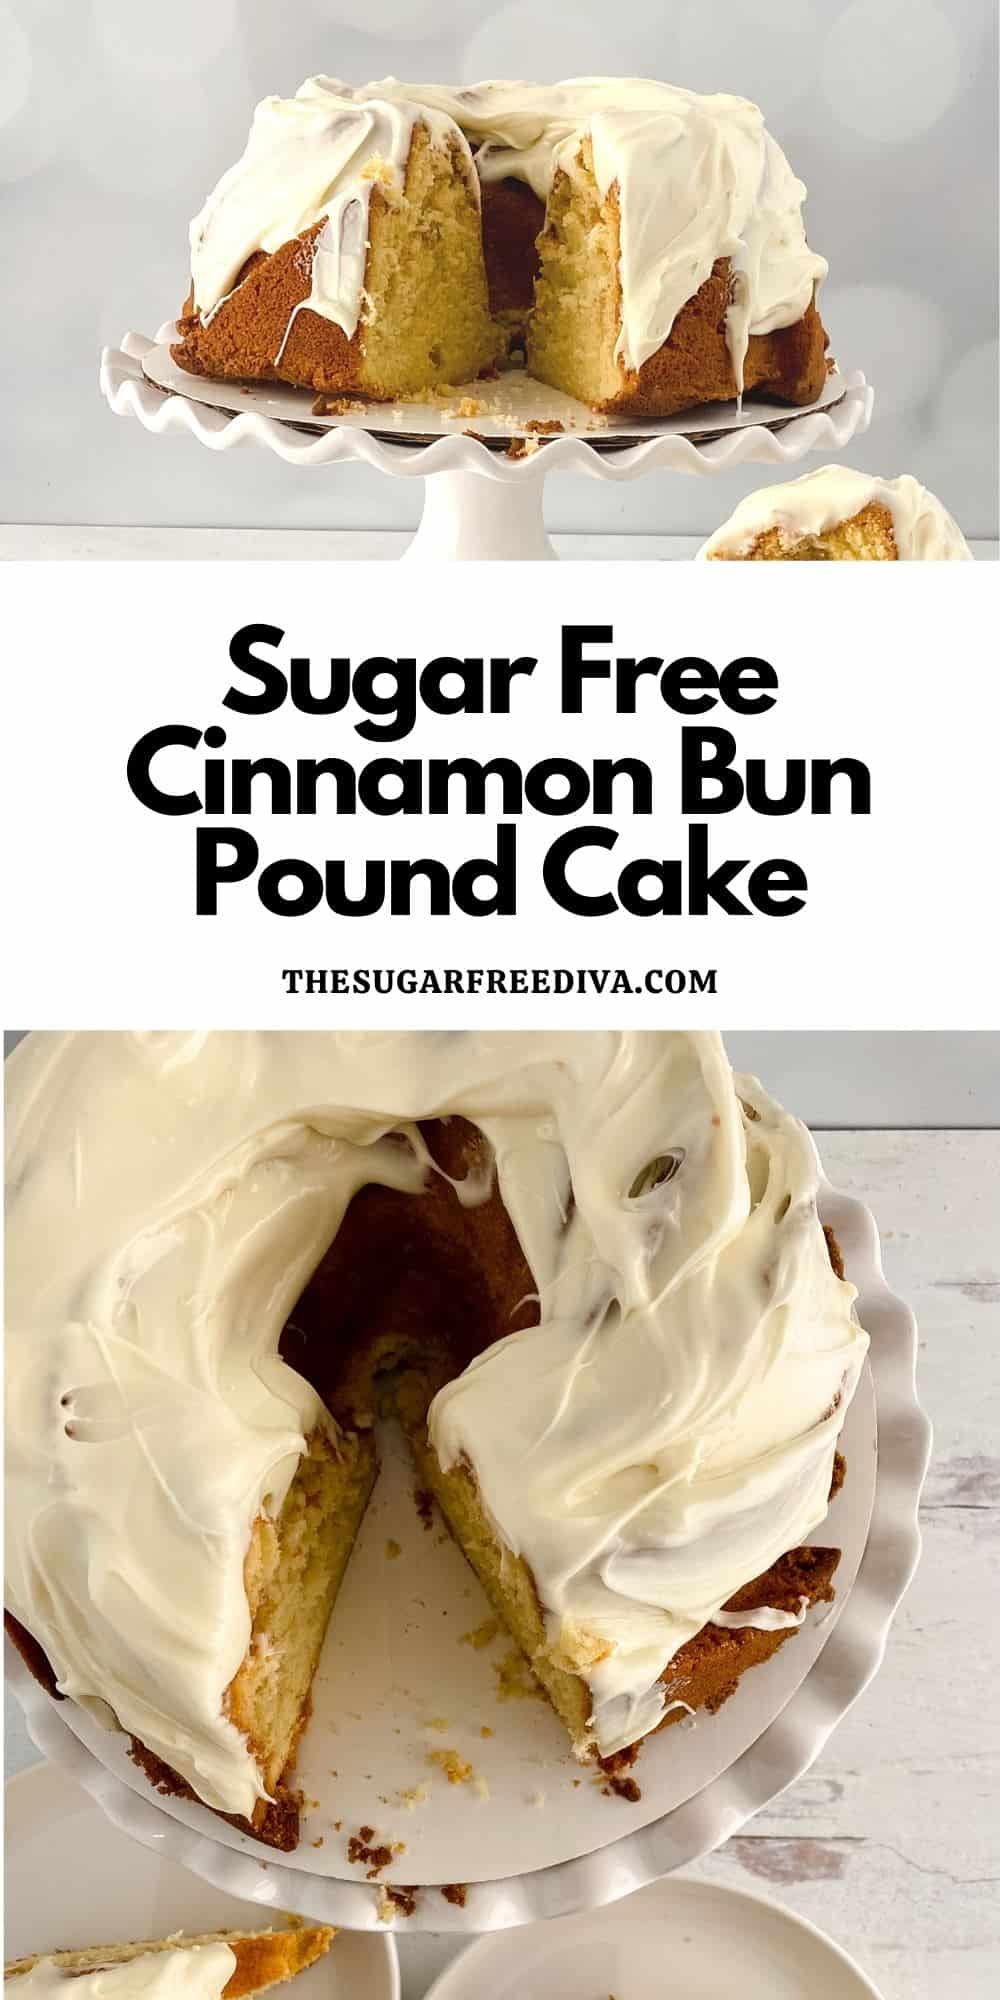 Sugar Free Cinnamon Bun Pound Cake, a delicious  recipe for buttery cake  with icing on top made with no added sugar.